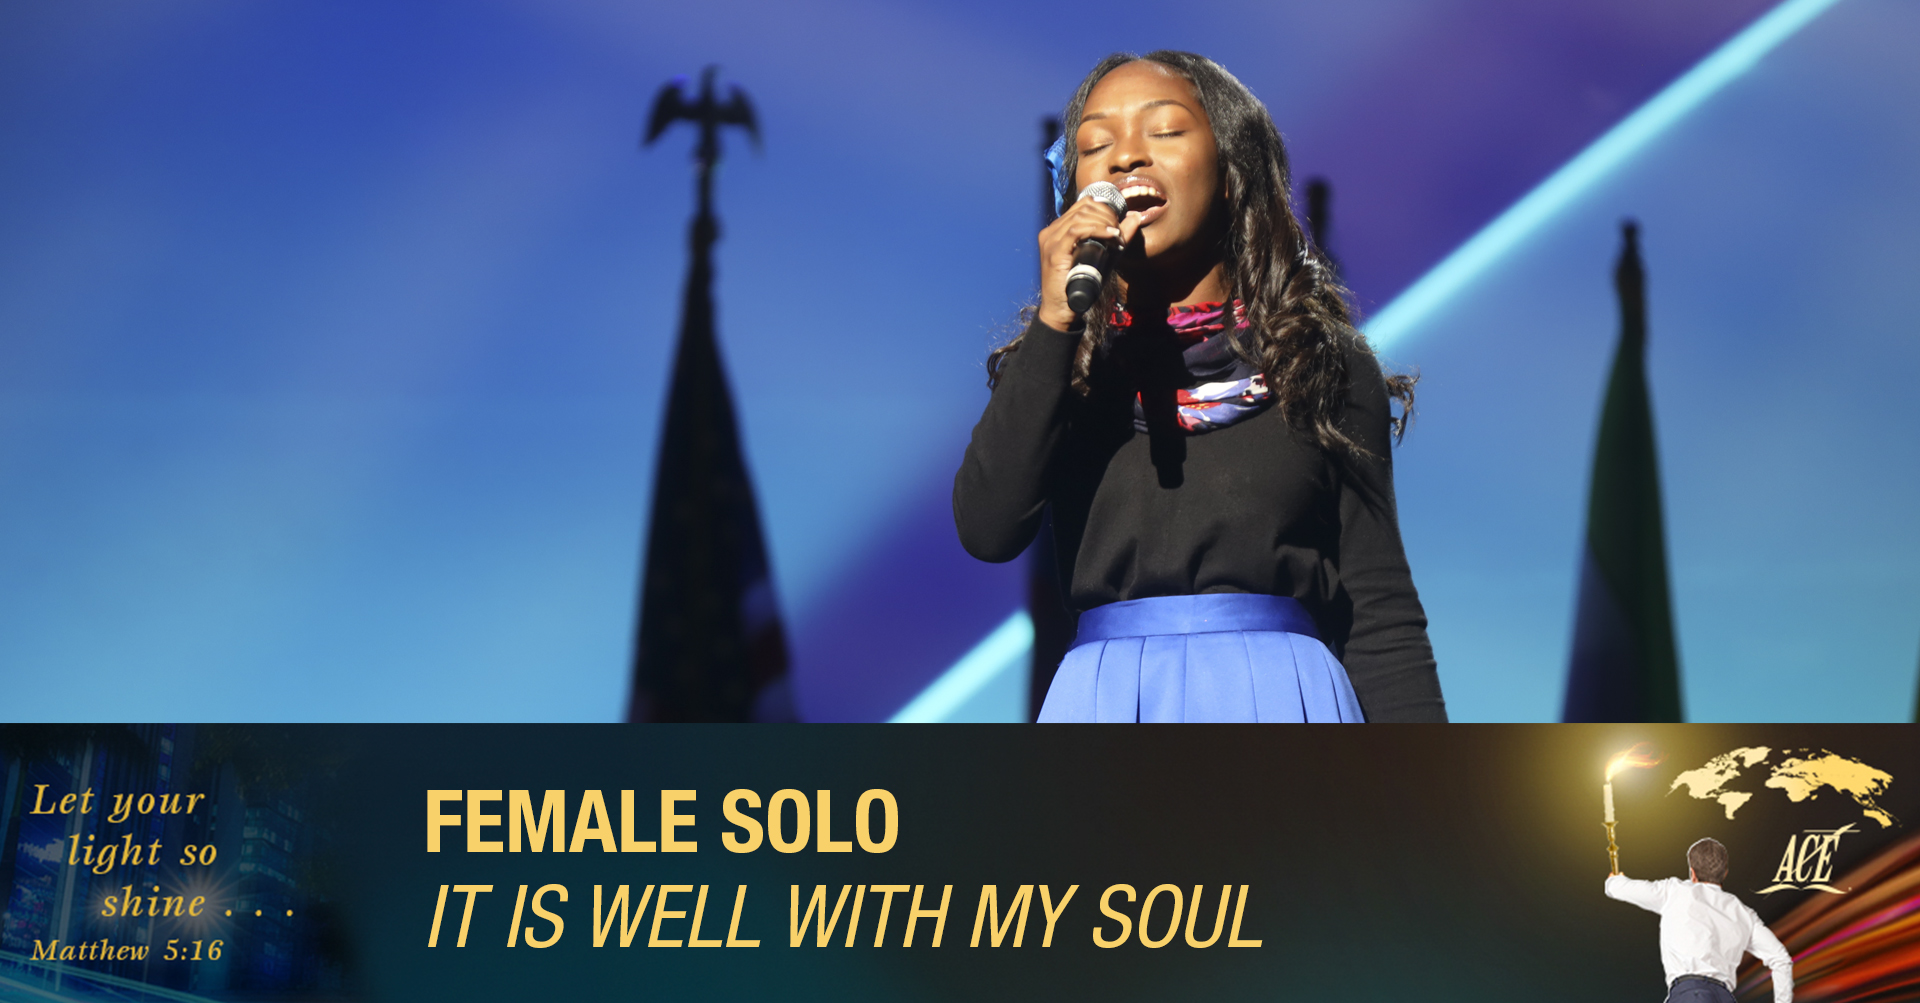 Female Solo, "It Is Well With My Soul" - ISC 2019